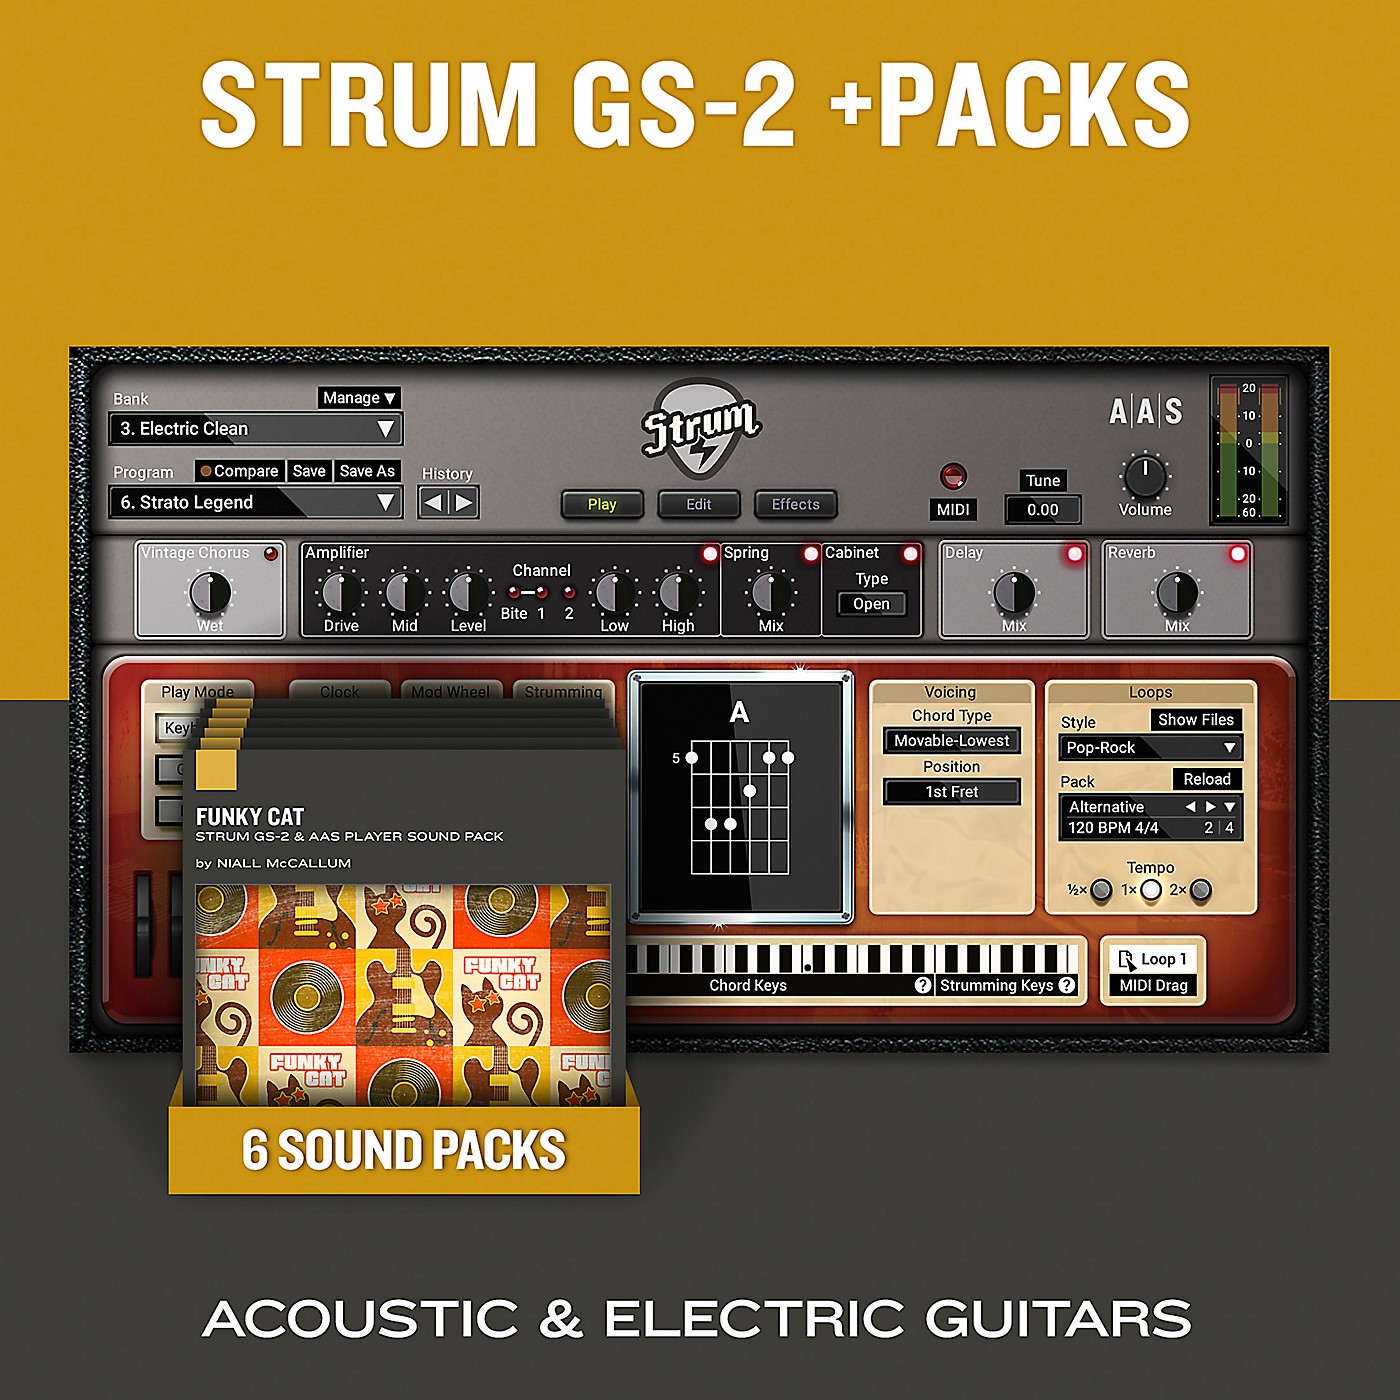 Applied Acoustics Systems Funky Cat - Sound Pack for the Free AAS Player or Strum GS-2 (Download) thumbnail